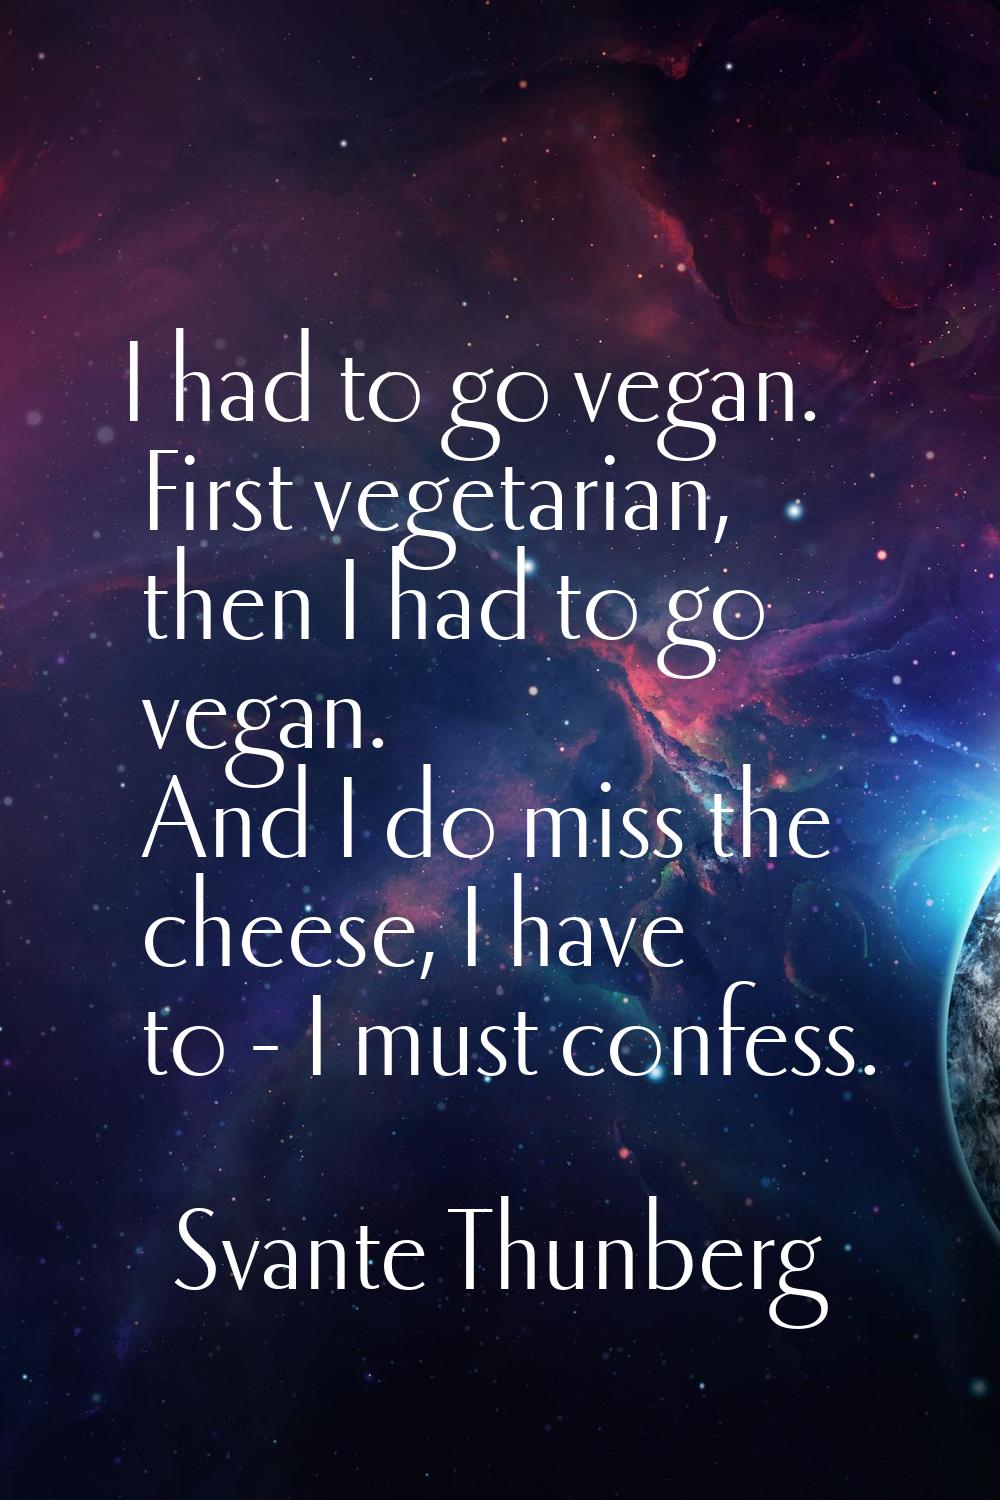 I had to go vegan. First vegetarian, then I had to go vegan. And I do miss the cheese, I have to - 